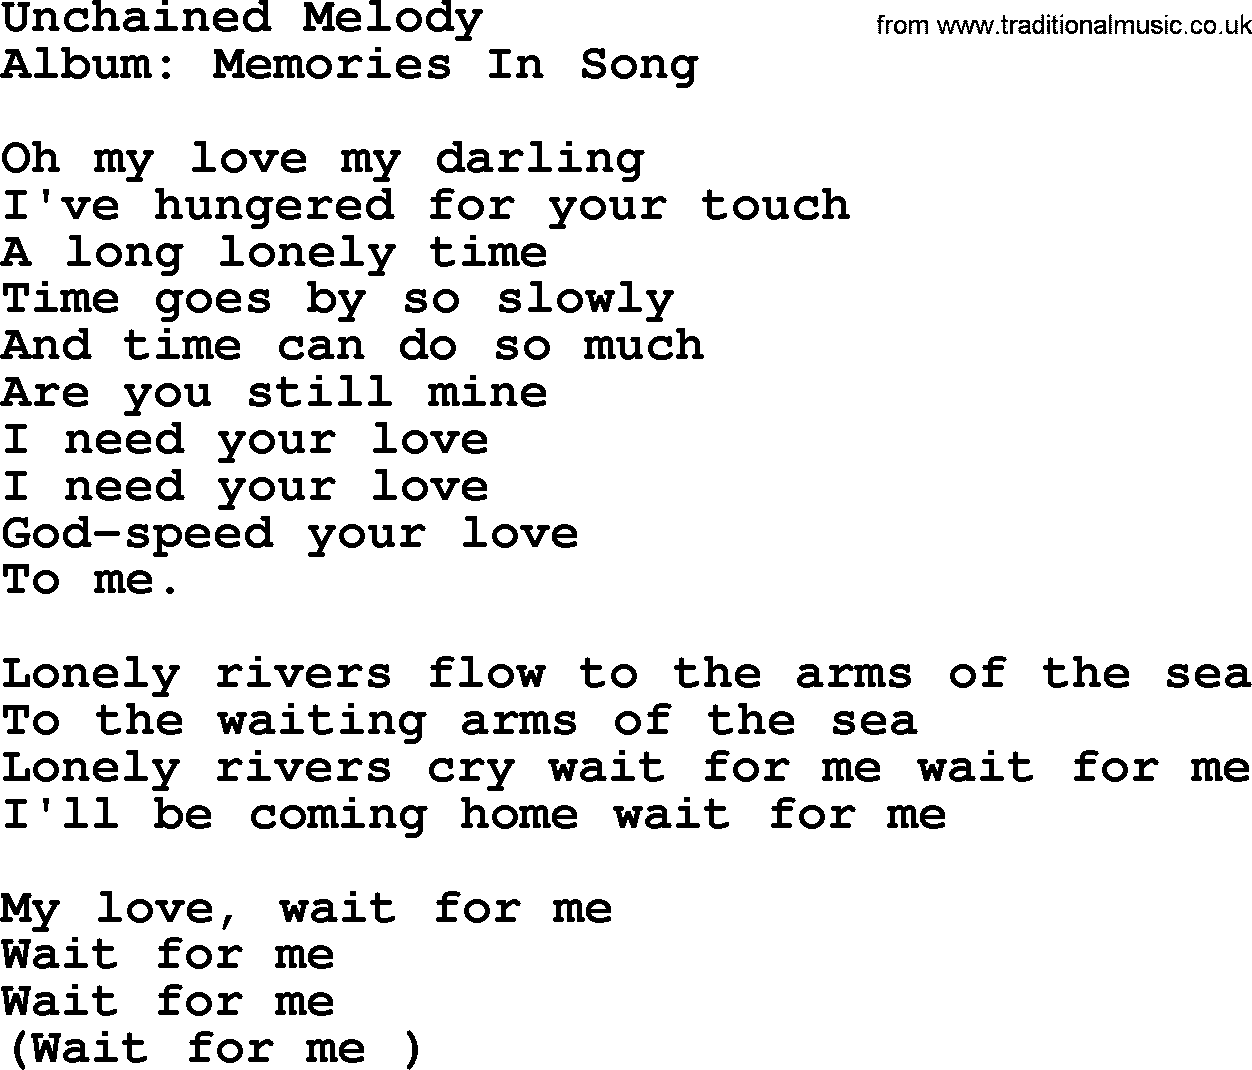 Marty Robbins song: Unchained Melody, lyrics